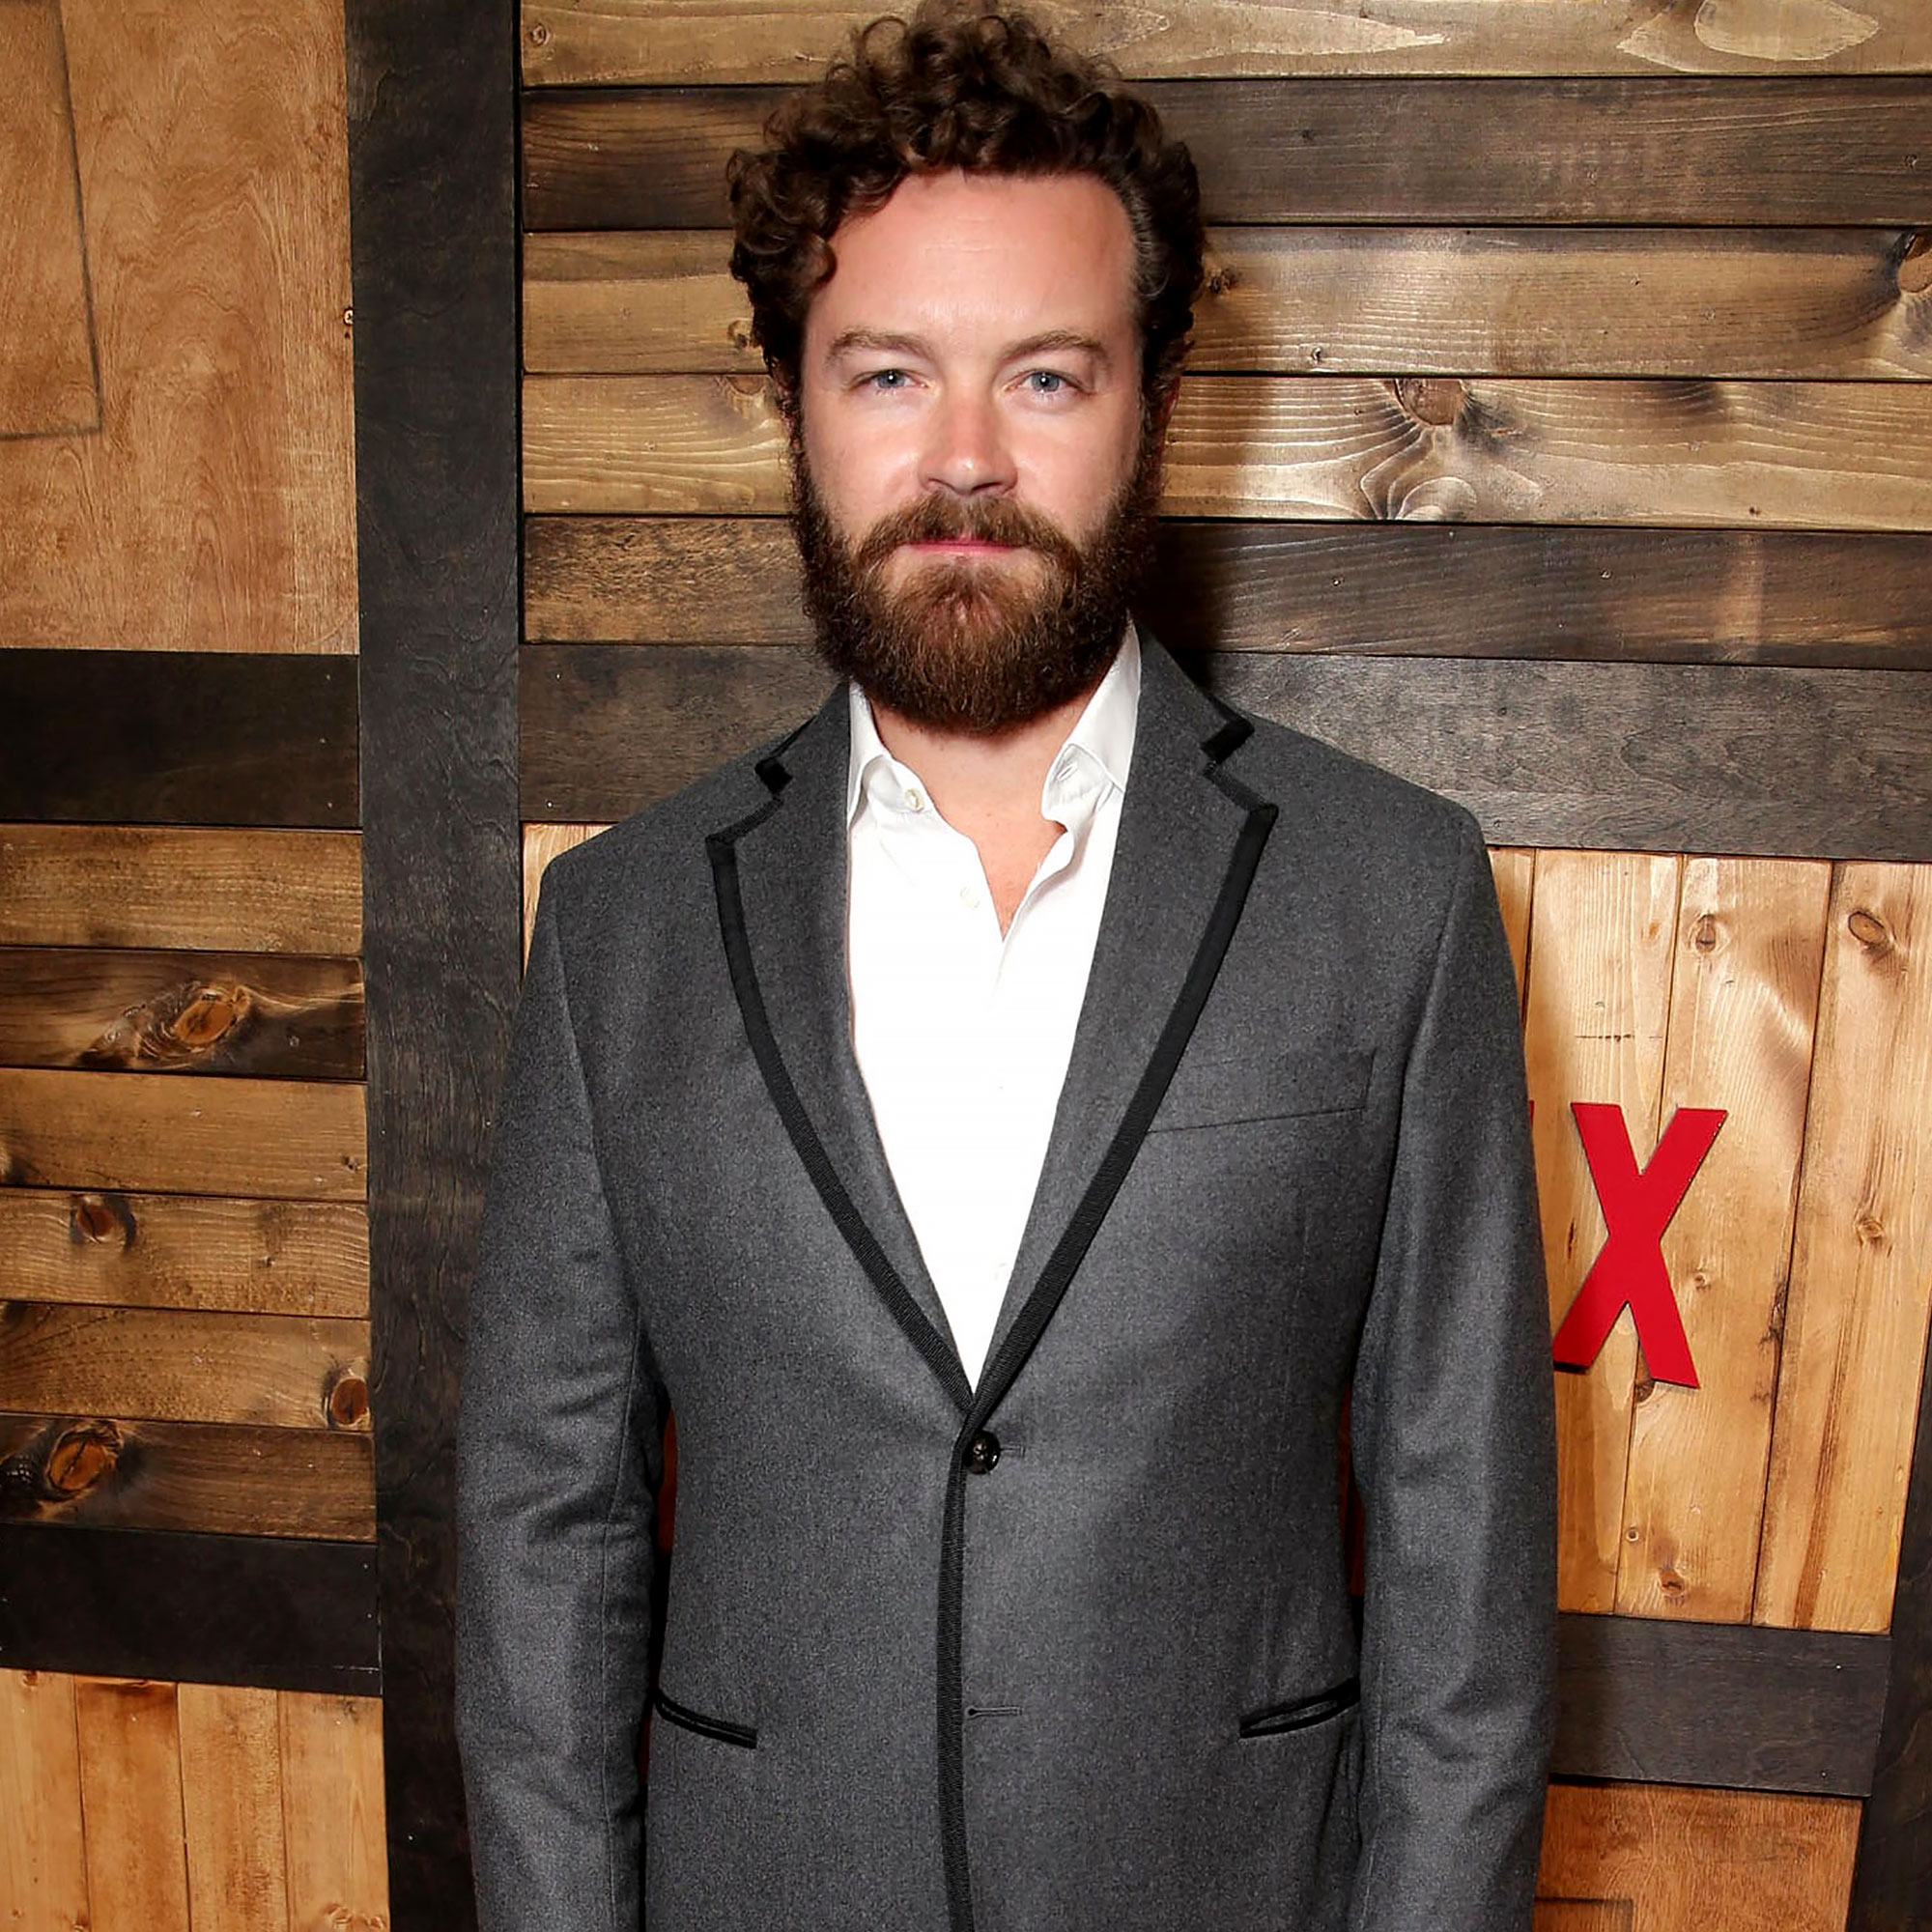 Danny Masterson Rape Trial: Everything to Know